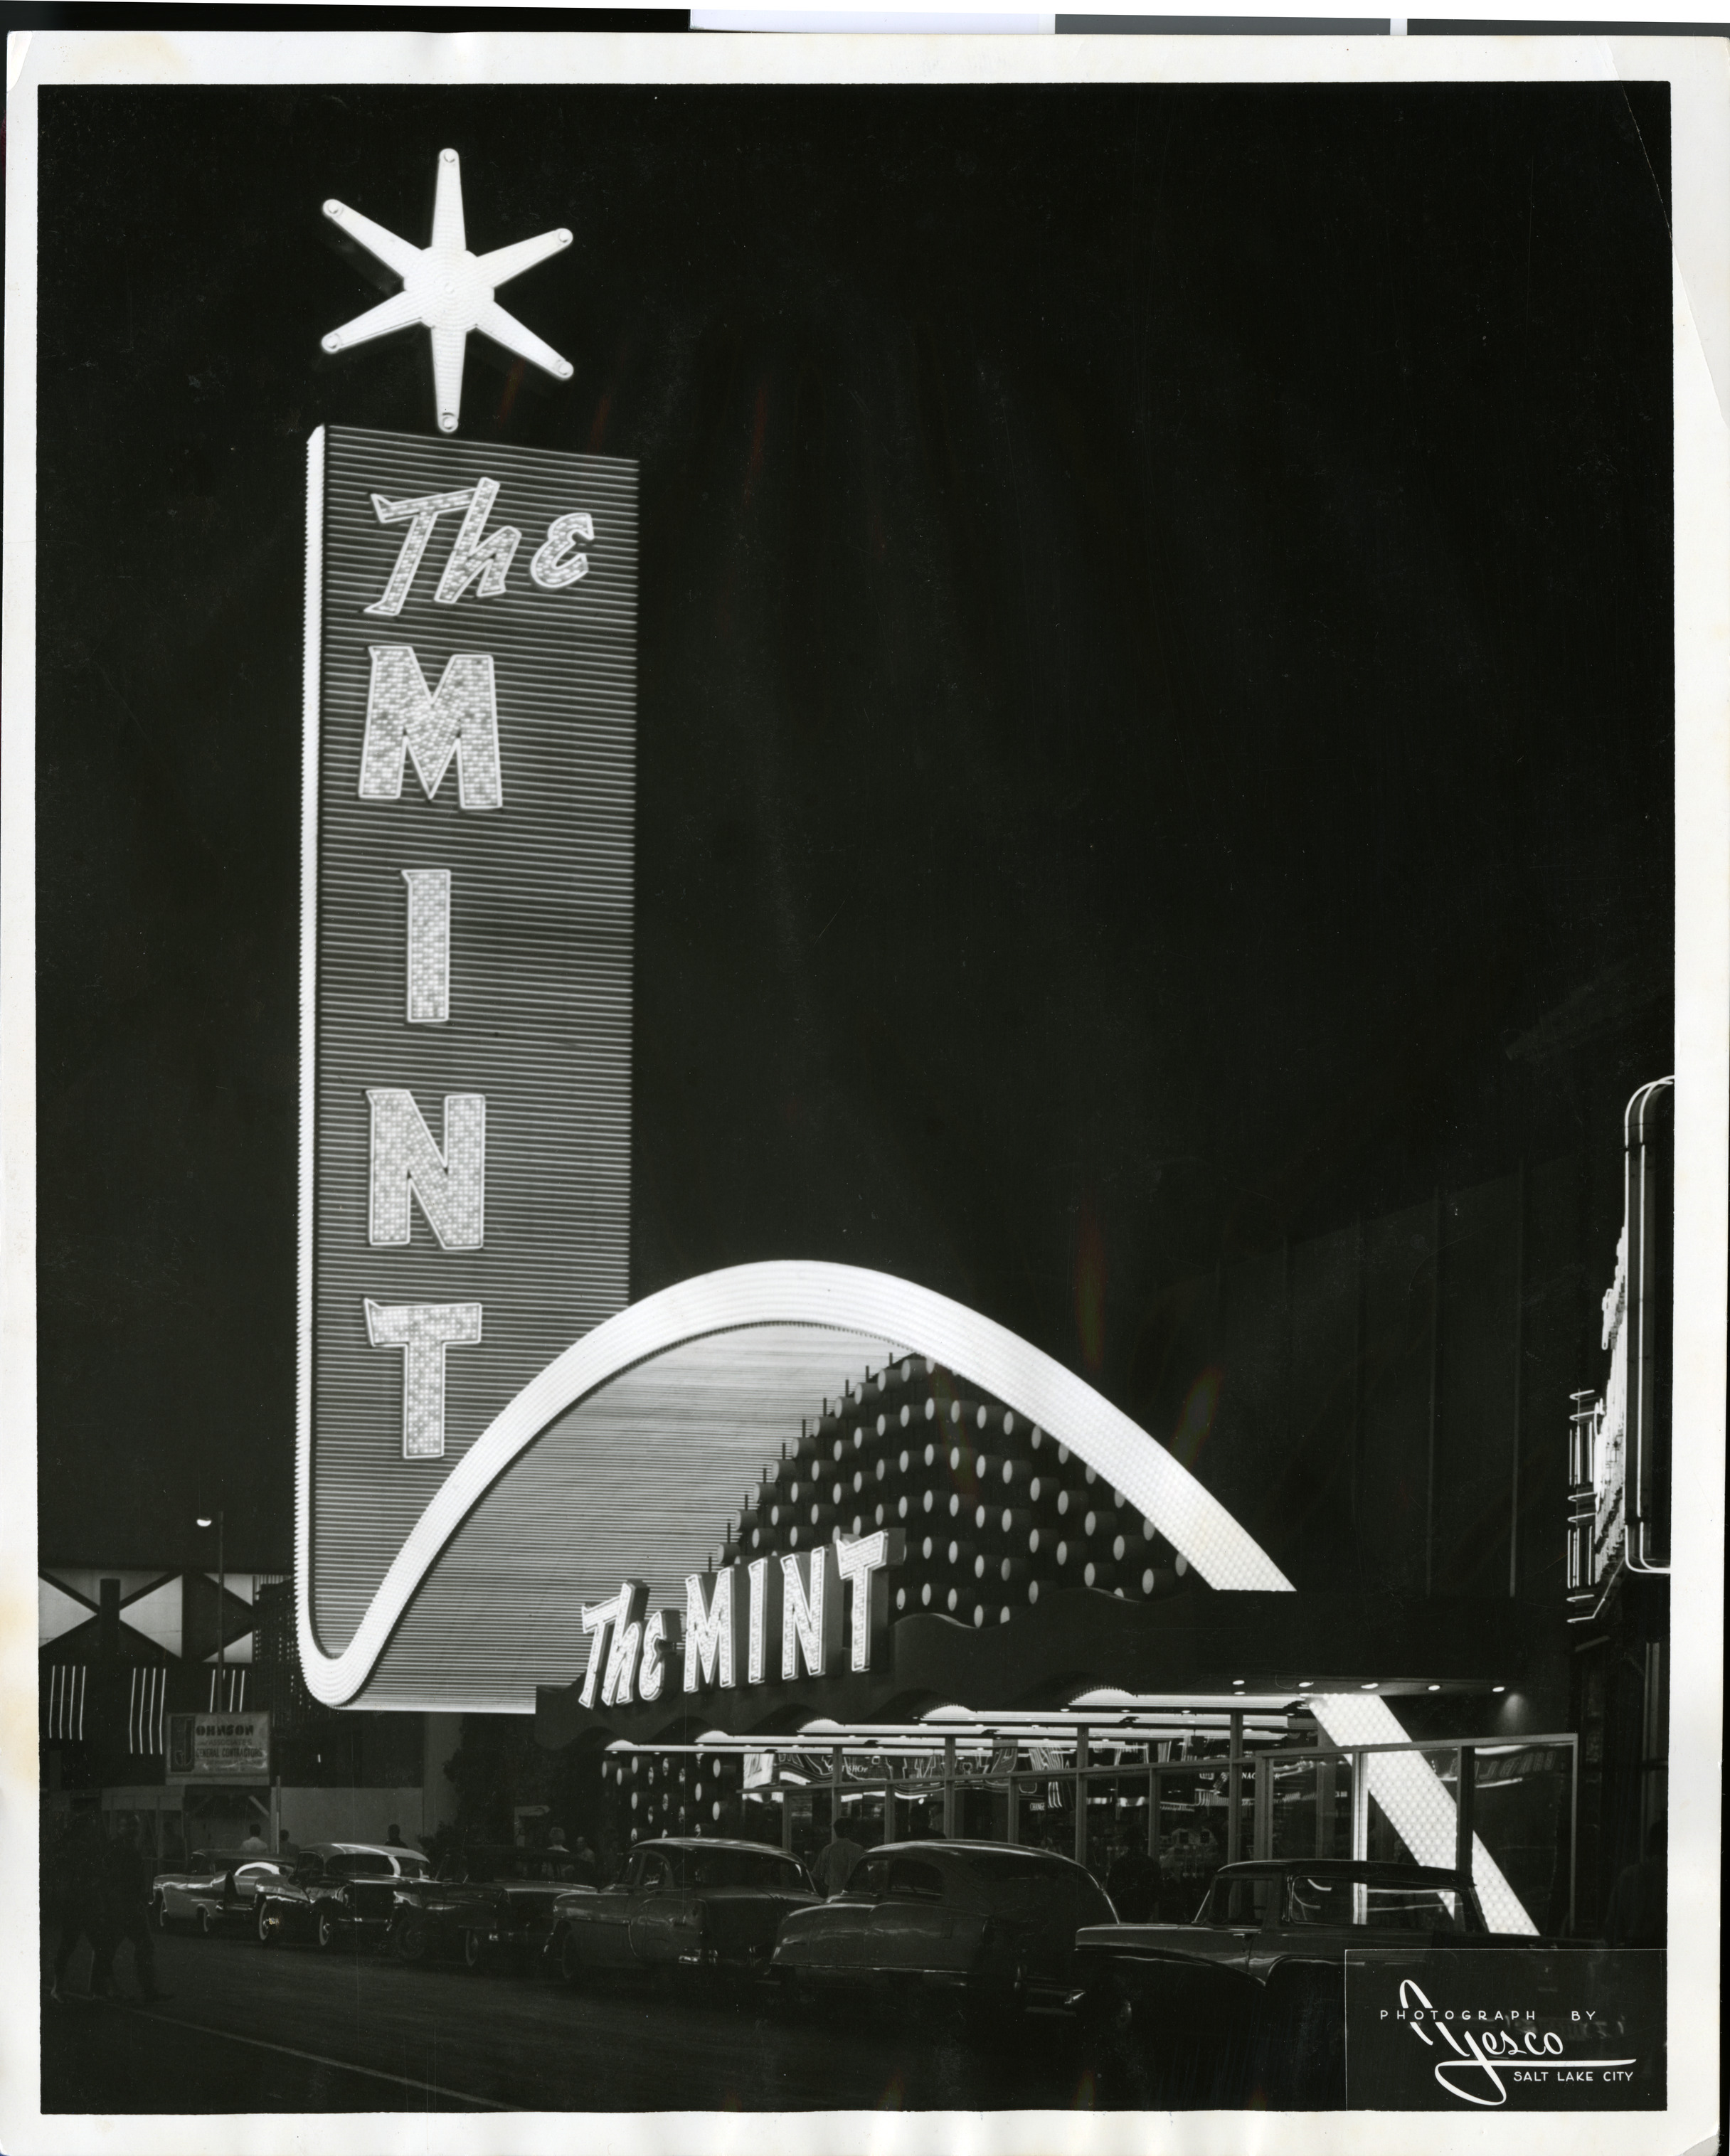 Photograph of the front exterior of the Mint Hotel (Las Vegas), circa 1957